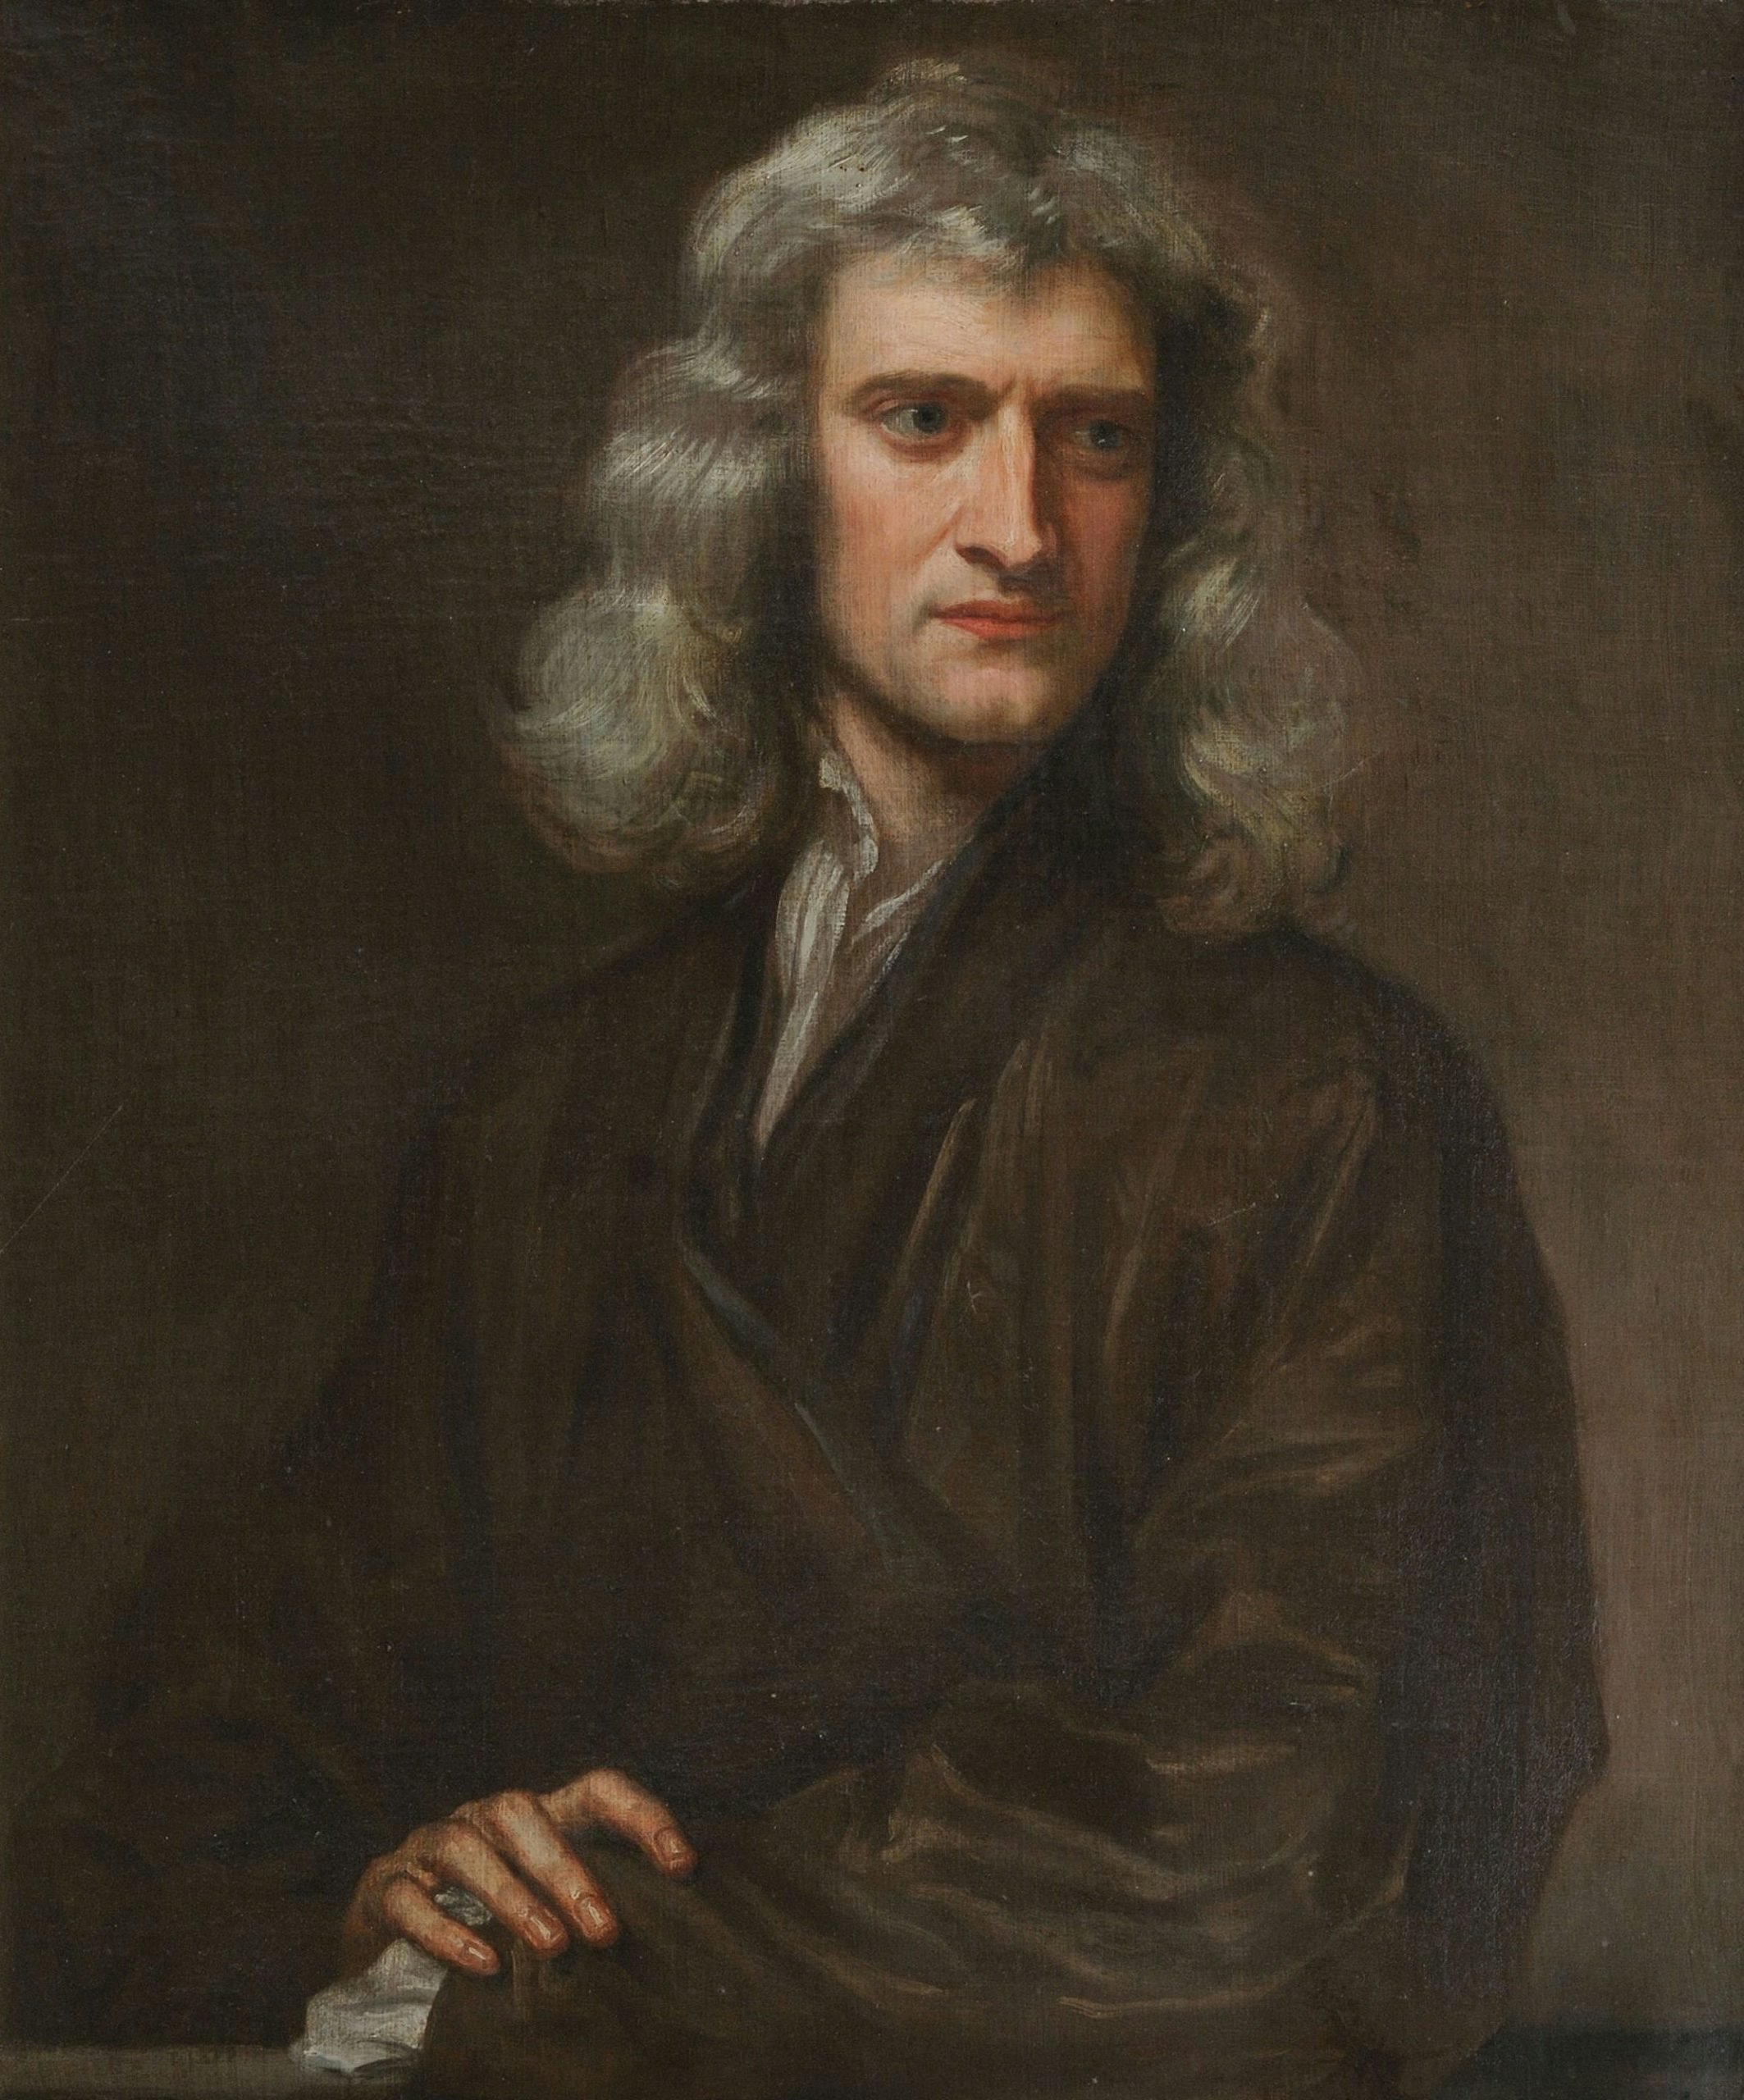 Isaac Newton. (Getty Images)